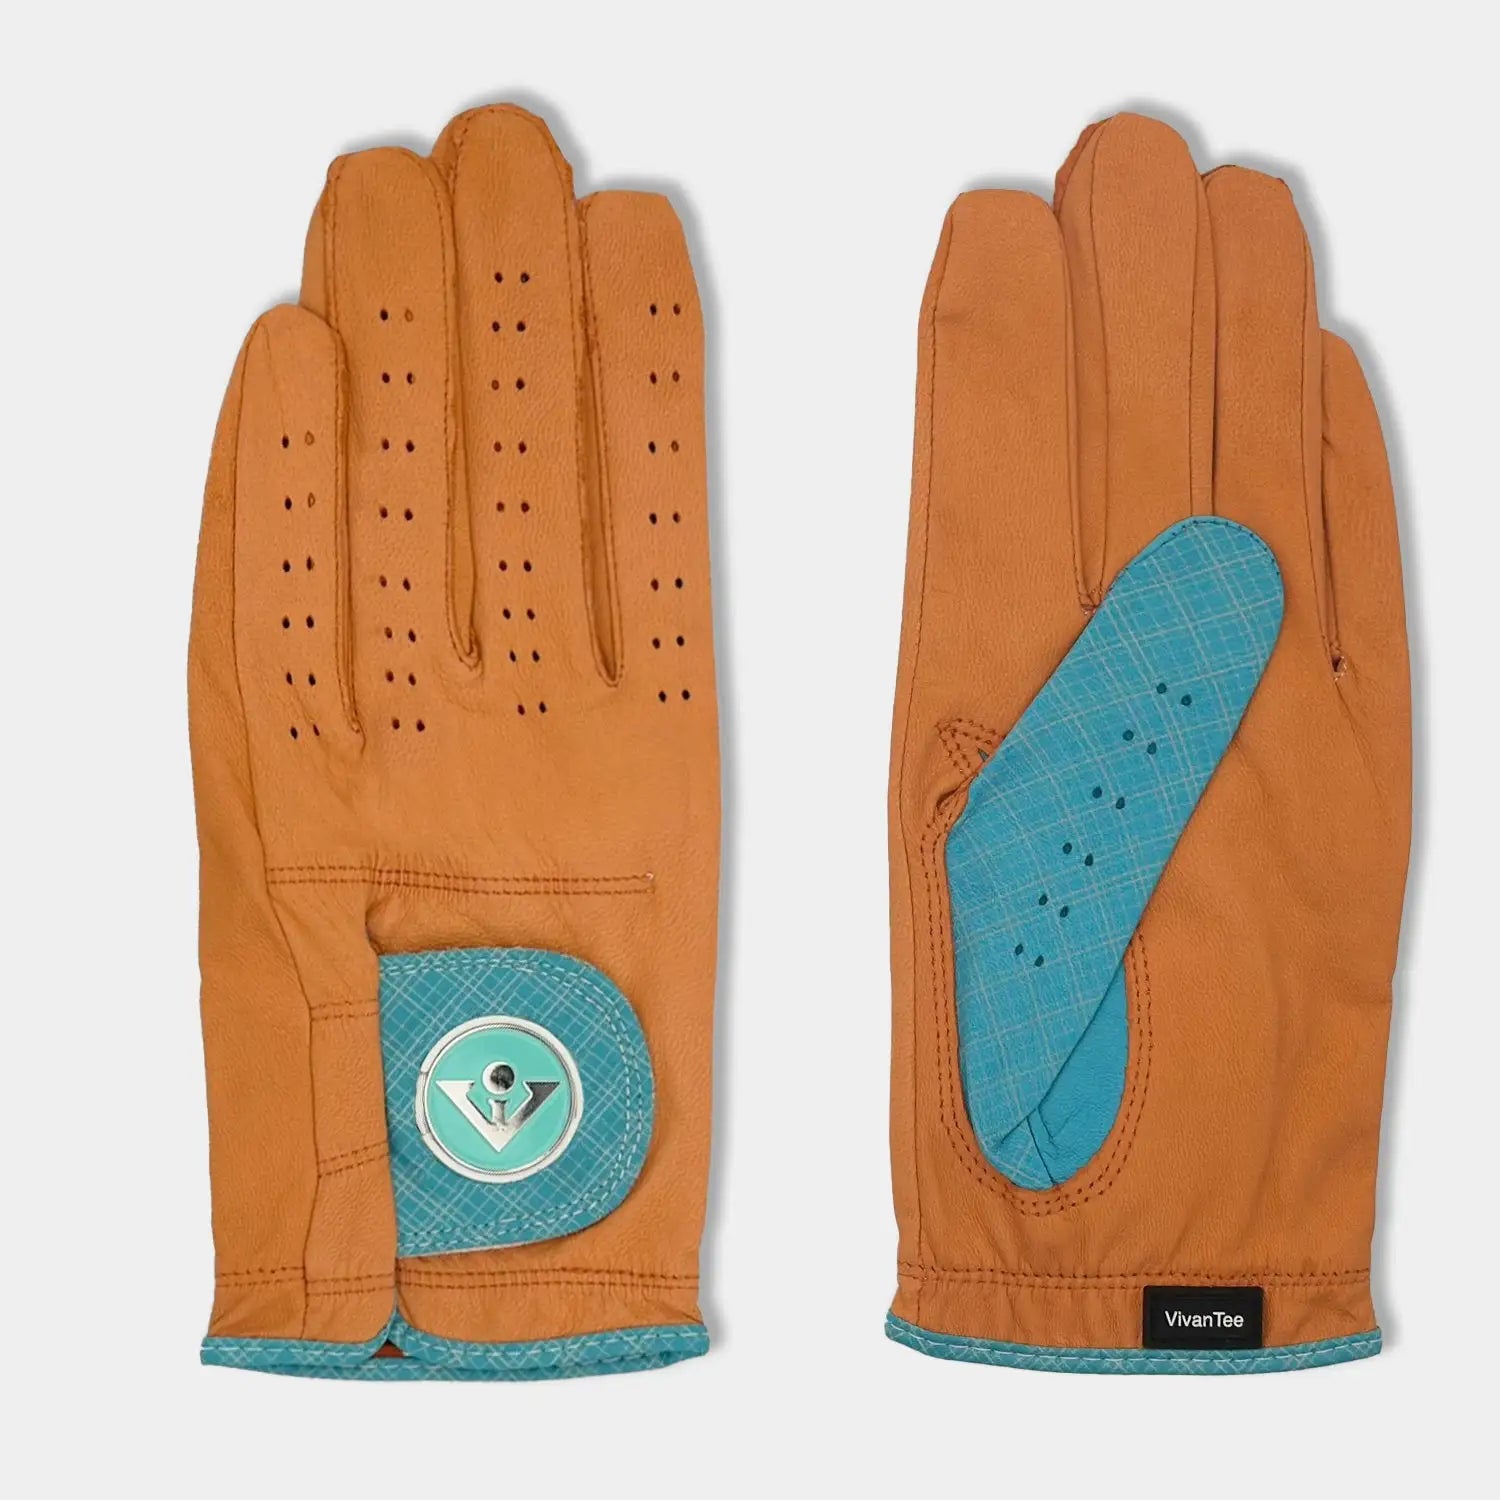 Orange and blue golf glove for men laying down showing top and bottom of the vibrant colors.